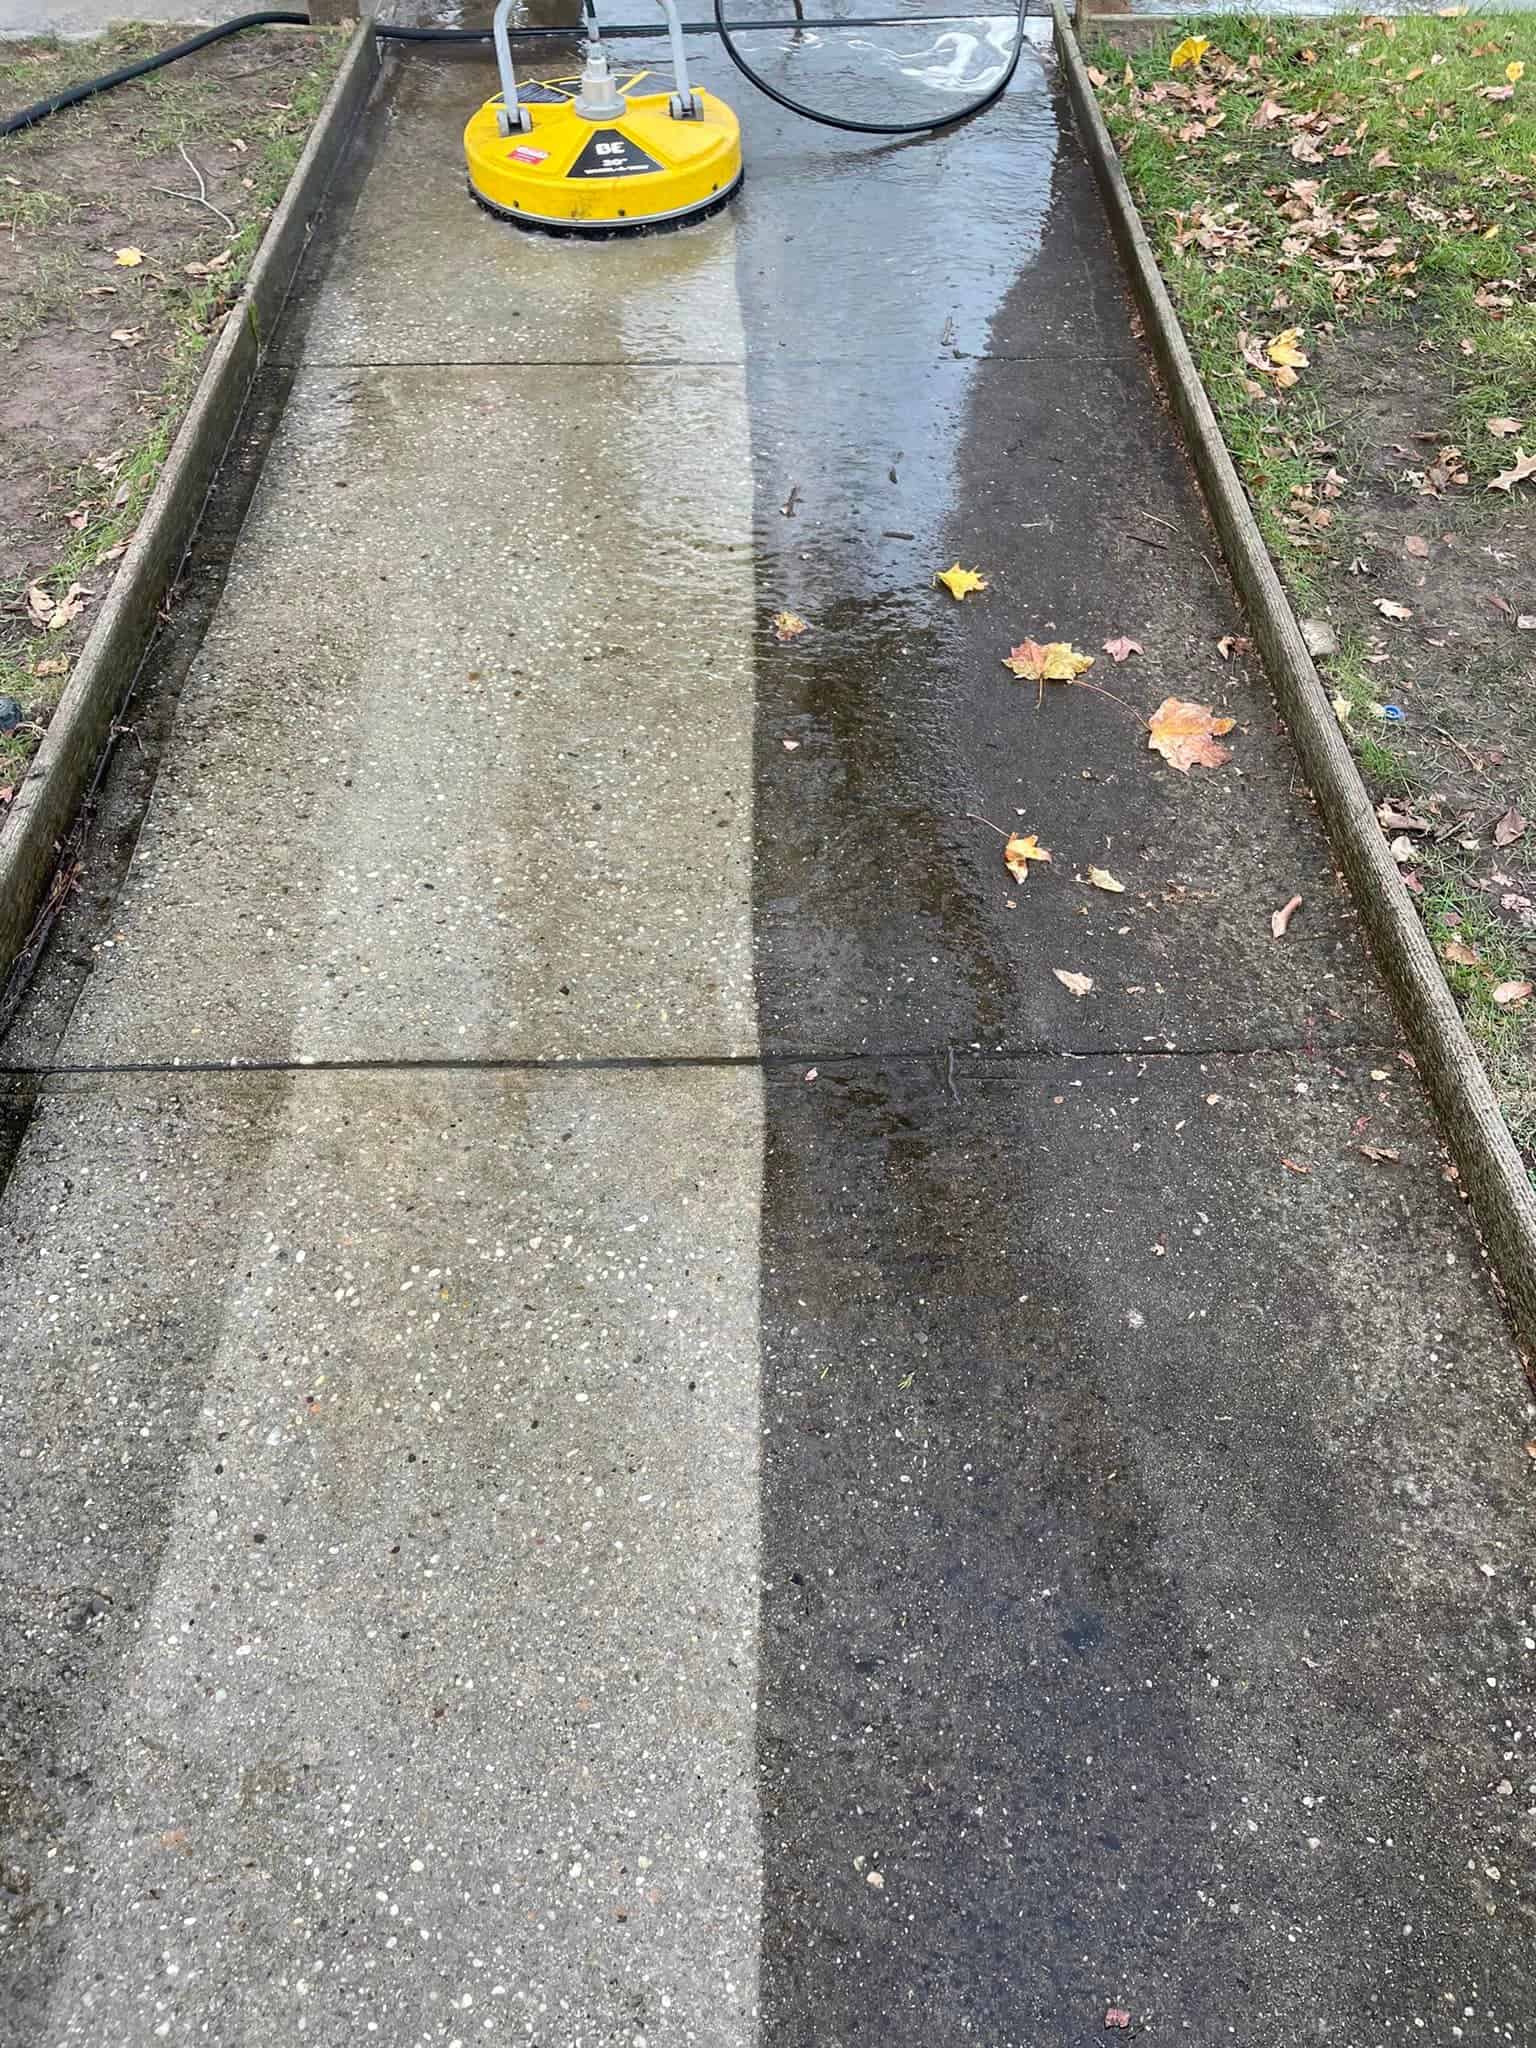 Power Washing Services Near Me in Atlantique, NY